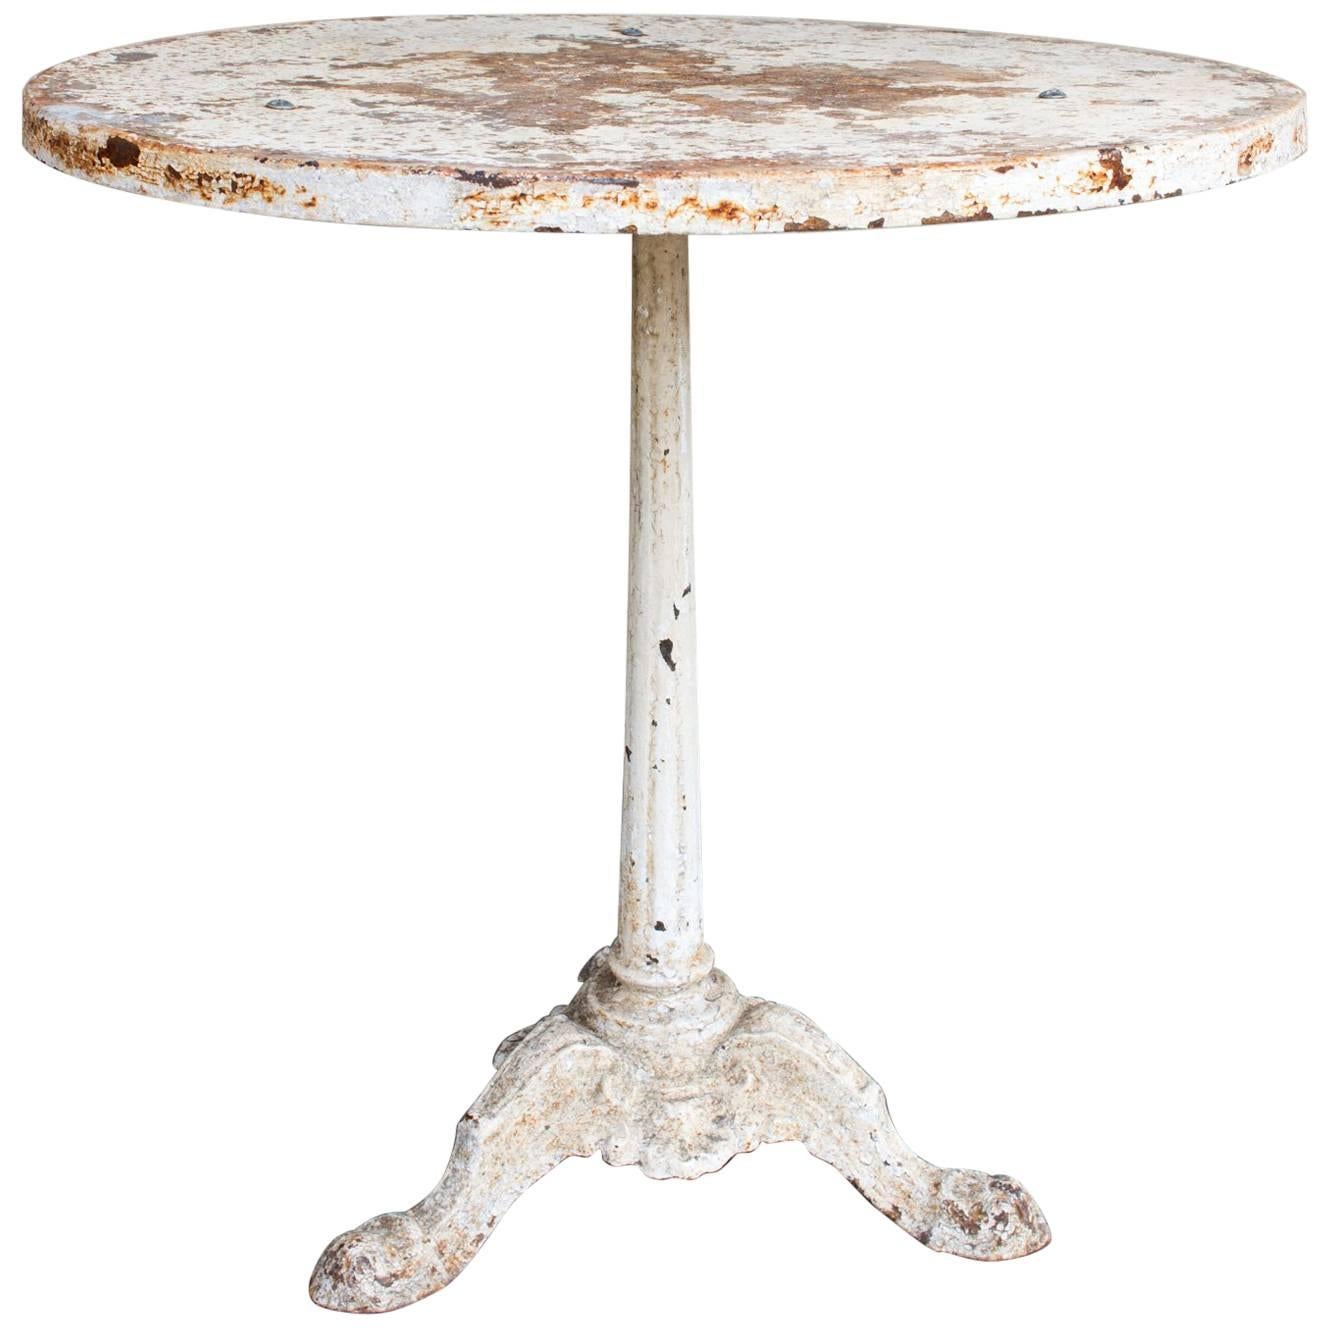 Rustic Painted 1920s Cast Iron and Metal Bistro Table Found in France